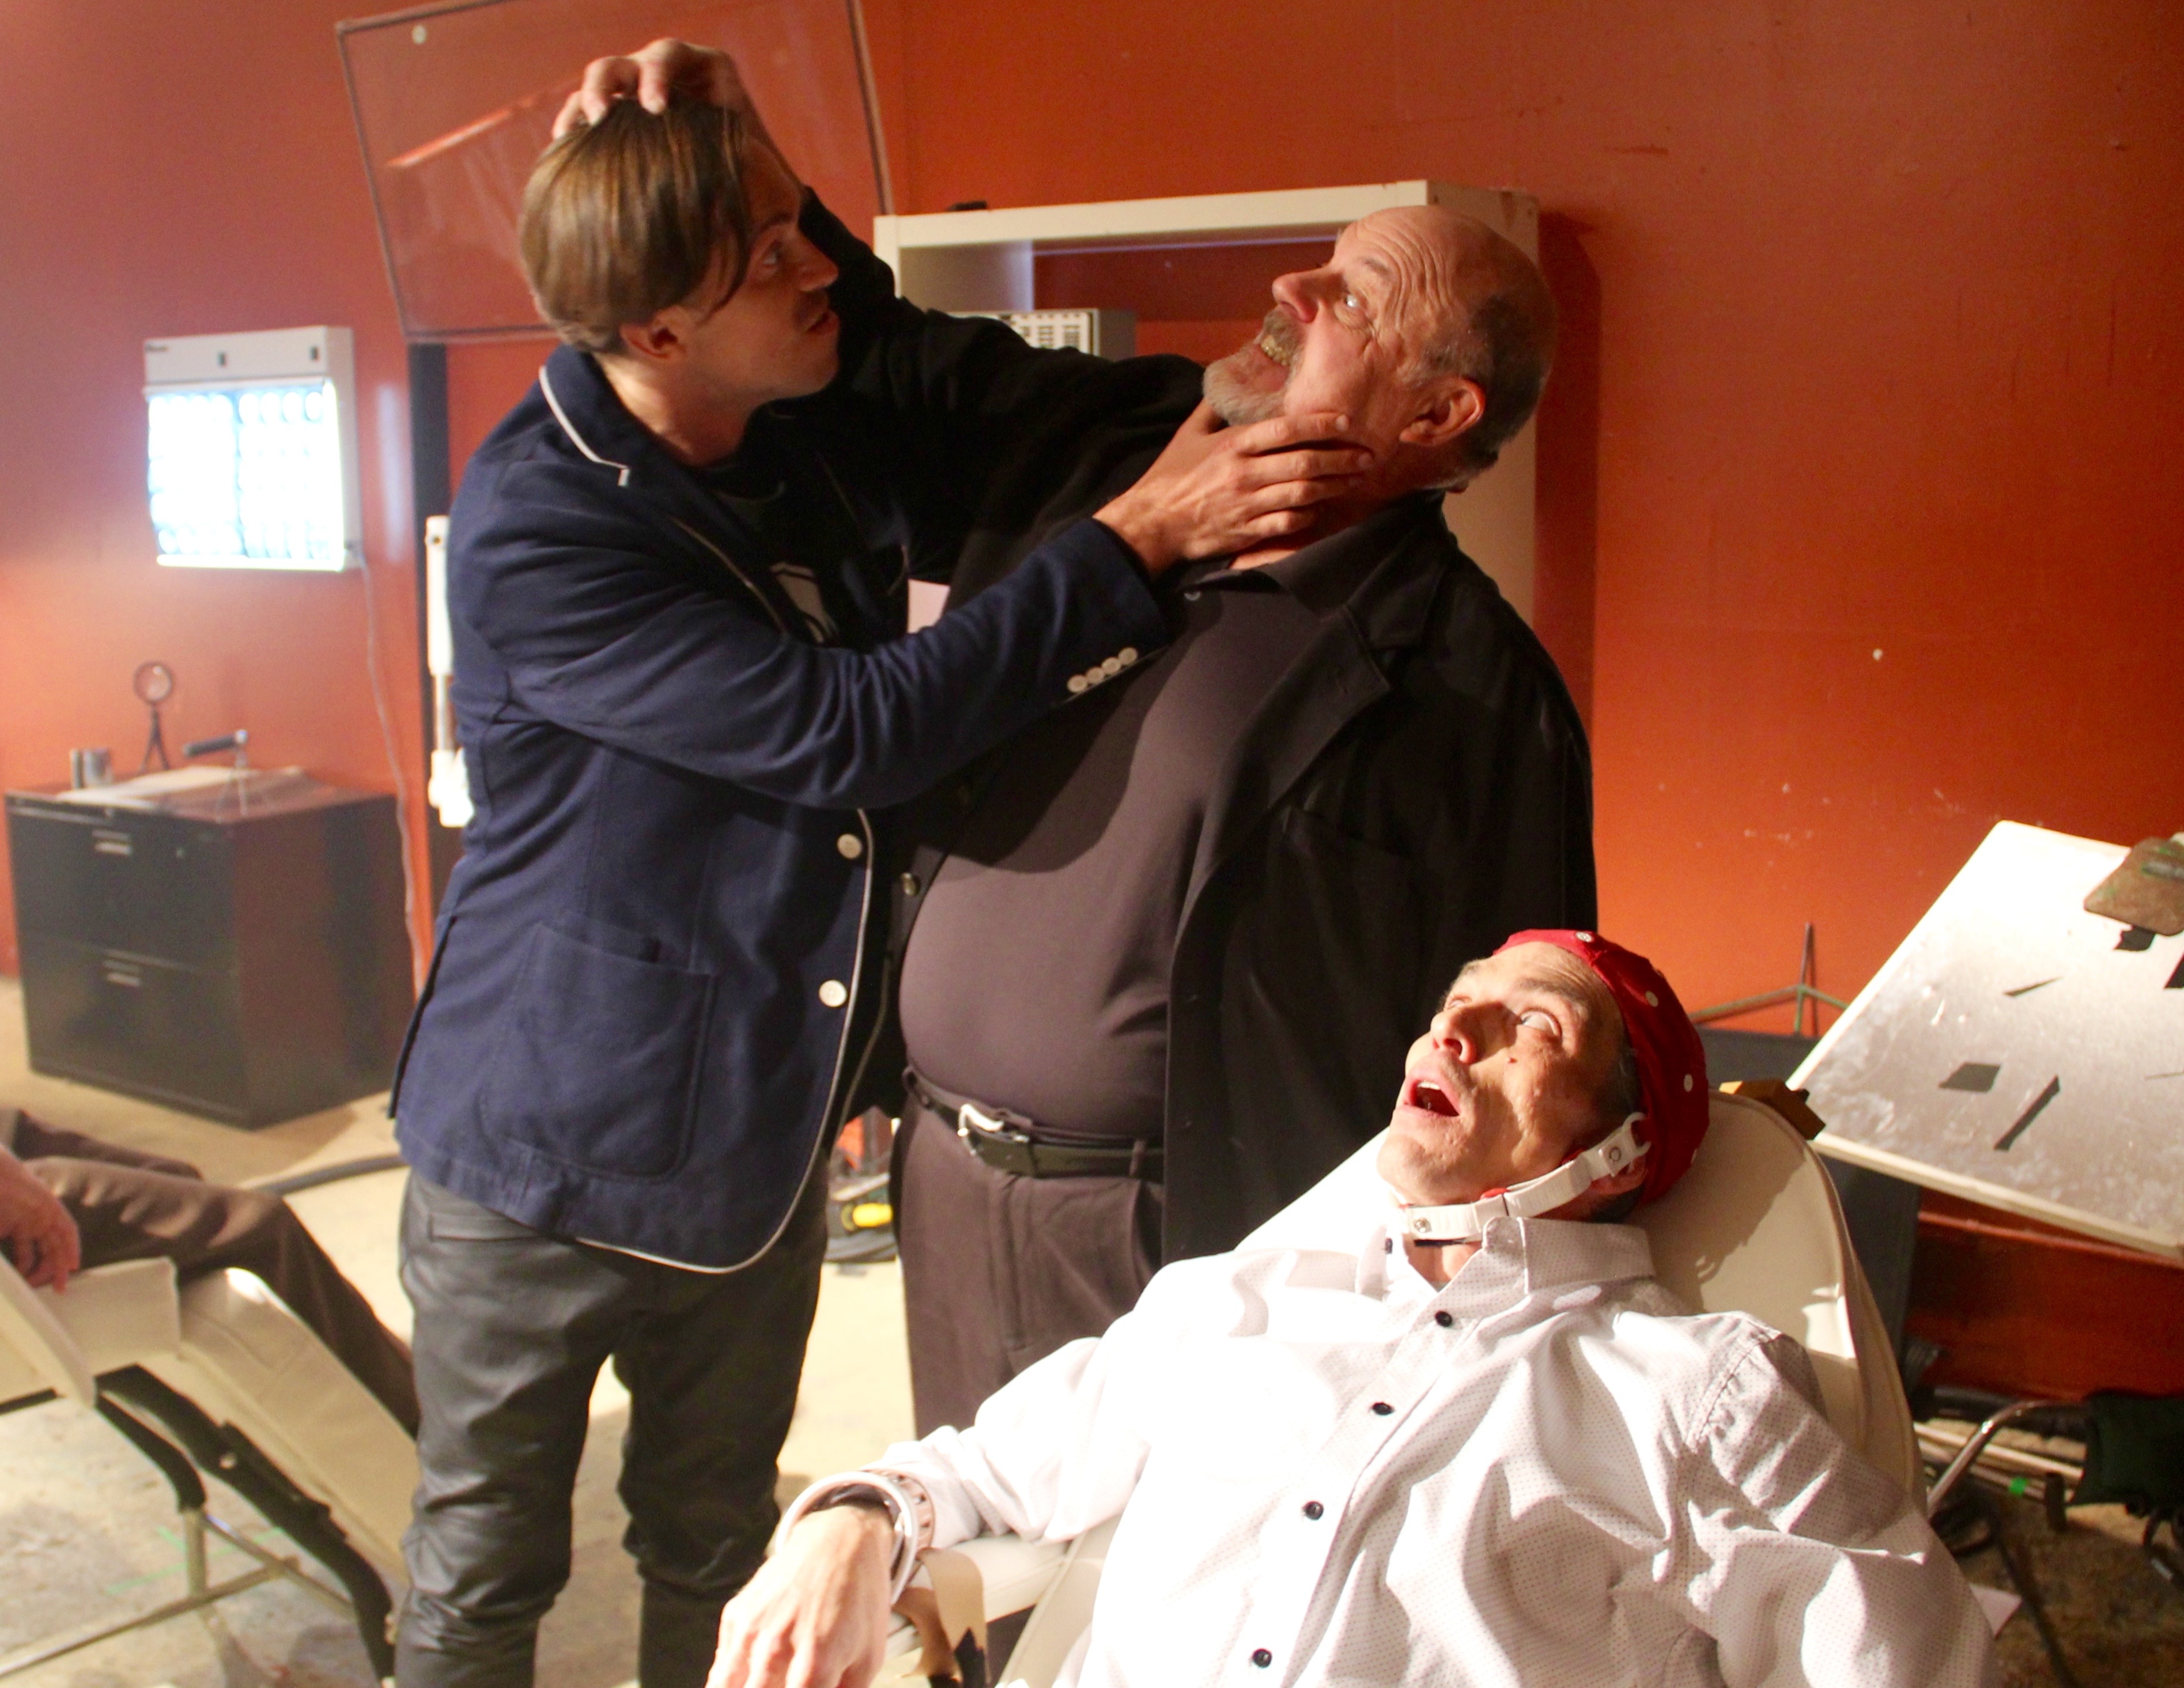 Serge Levin, Michael Ironside, and Charles Baker on the set of Abysm.